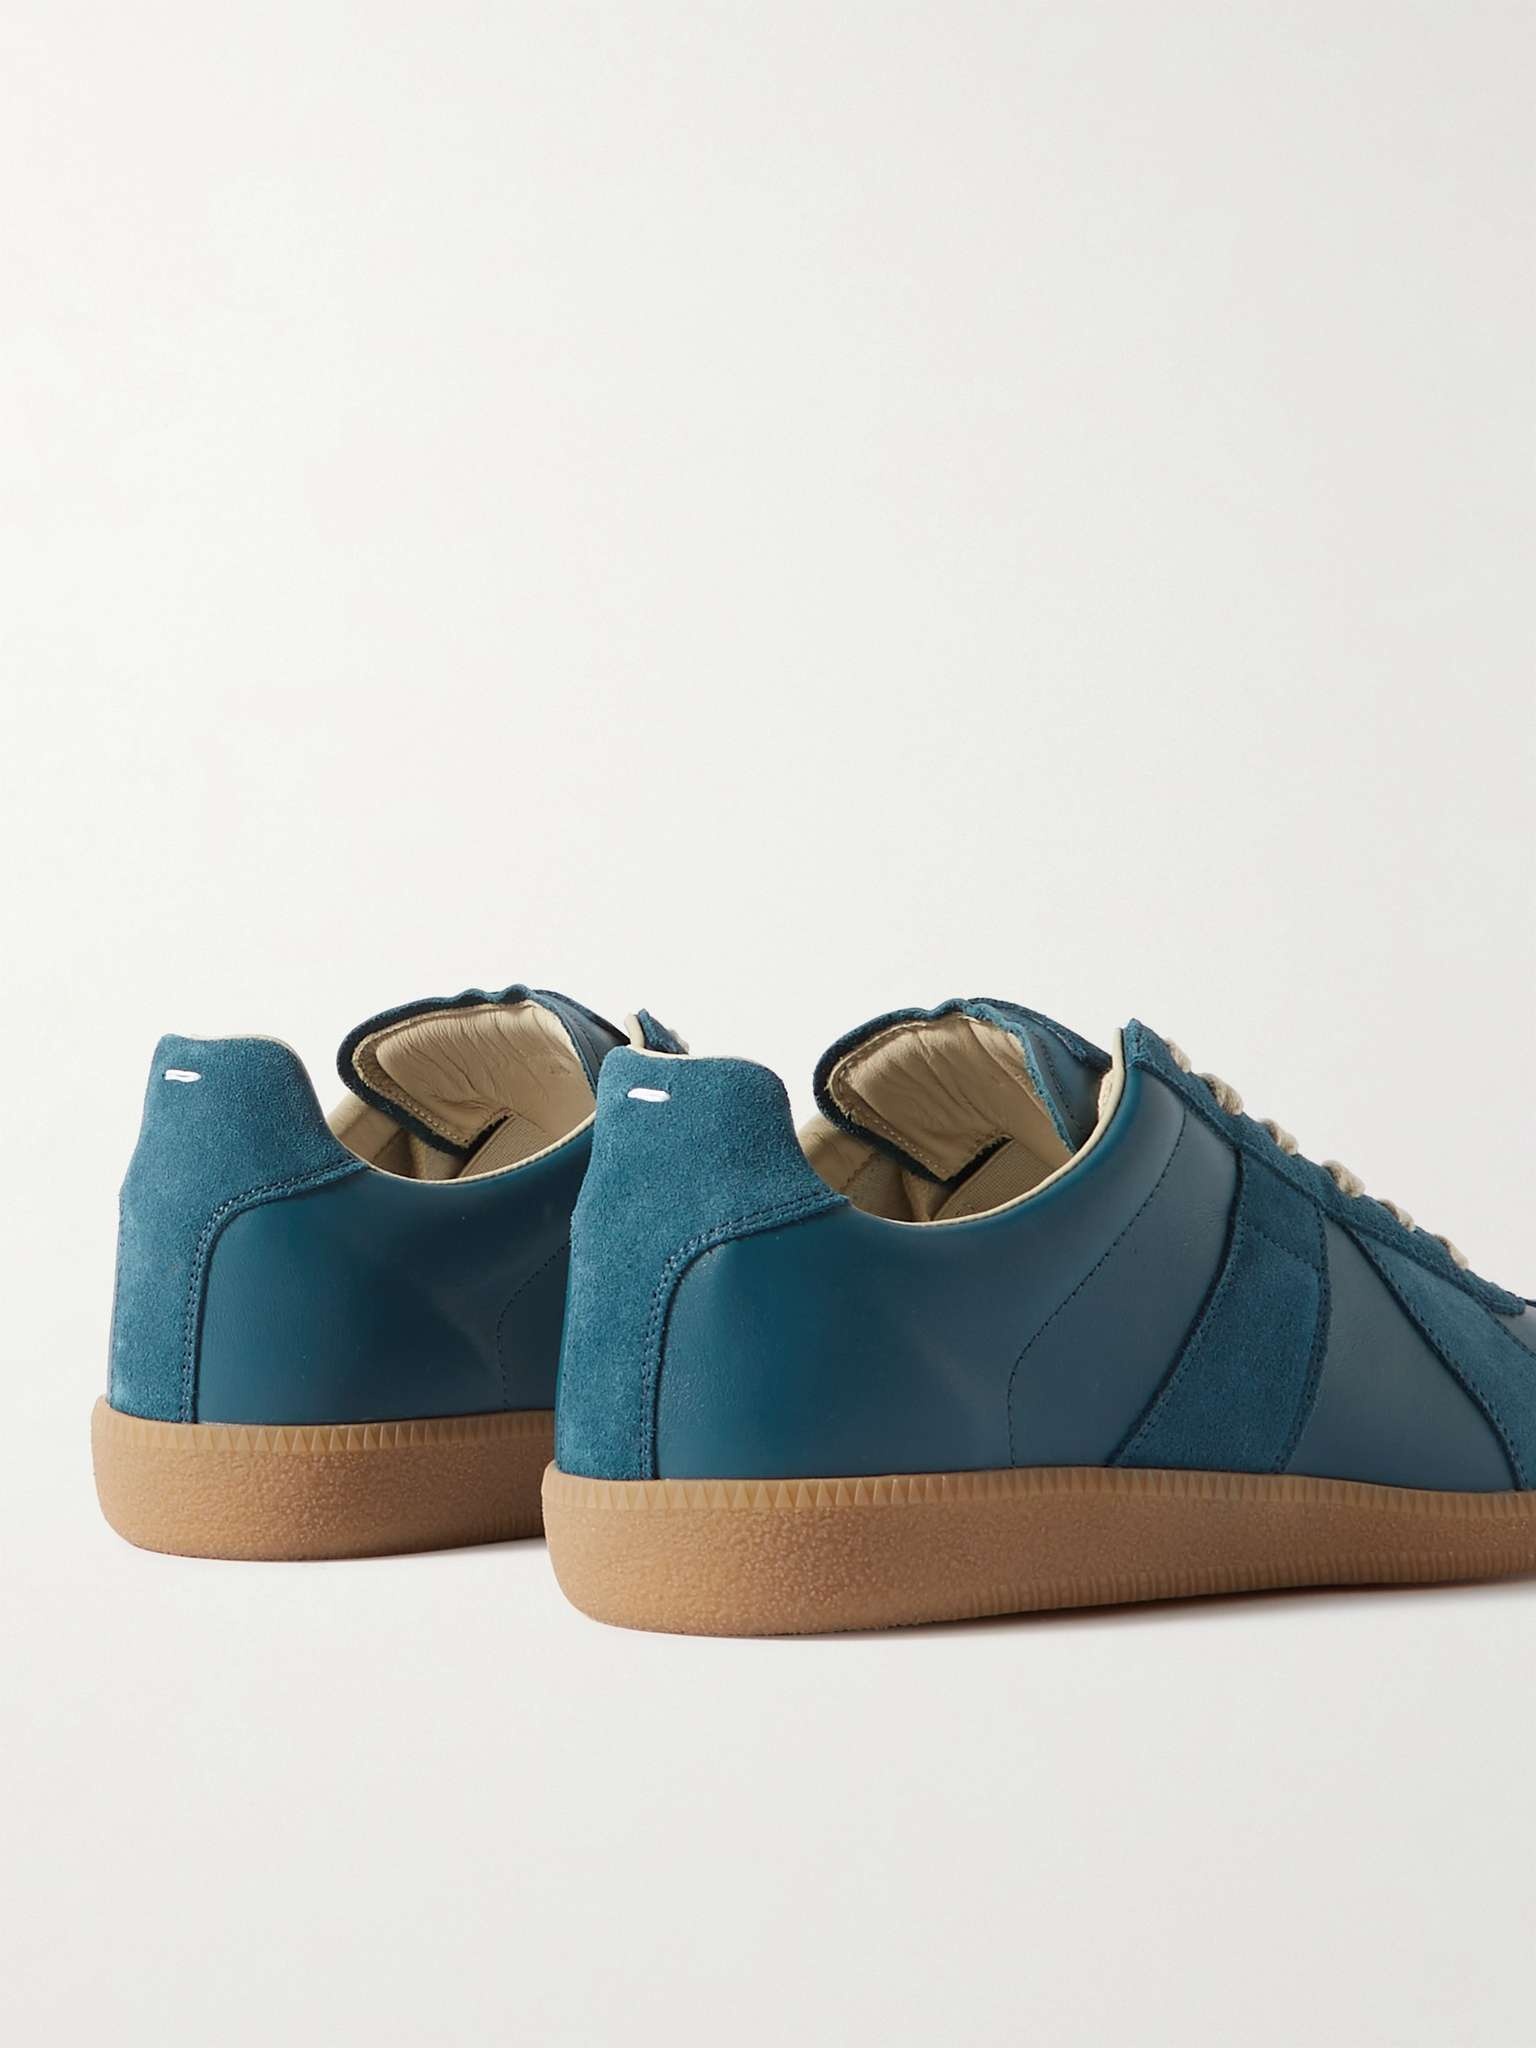 Replica Leather and Suede Sneakers - 5